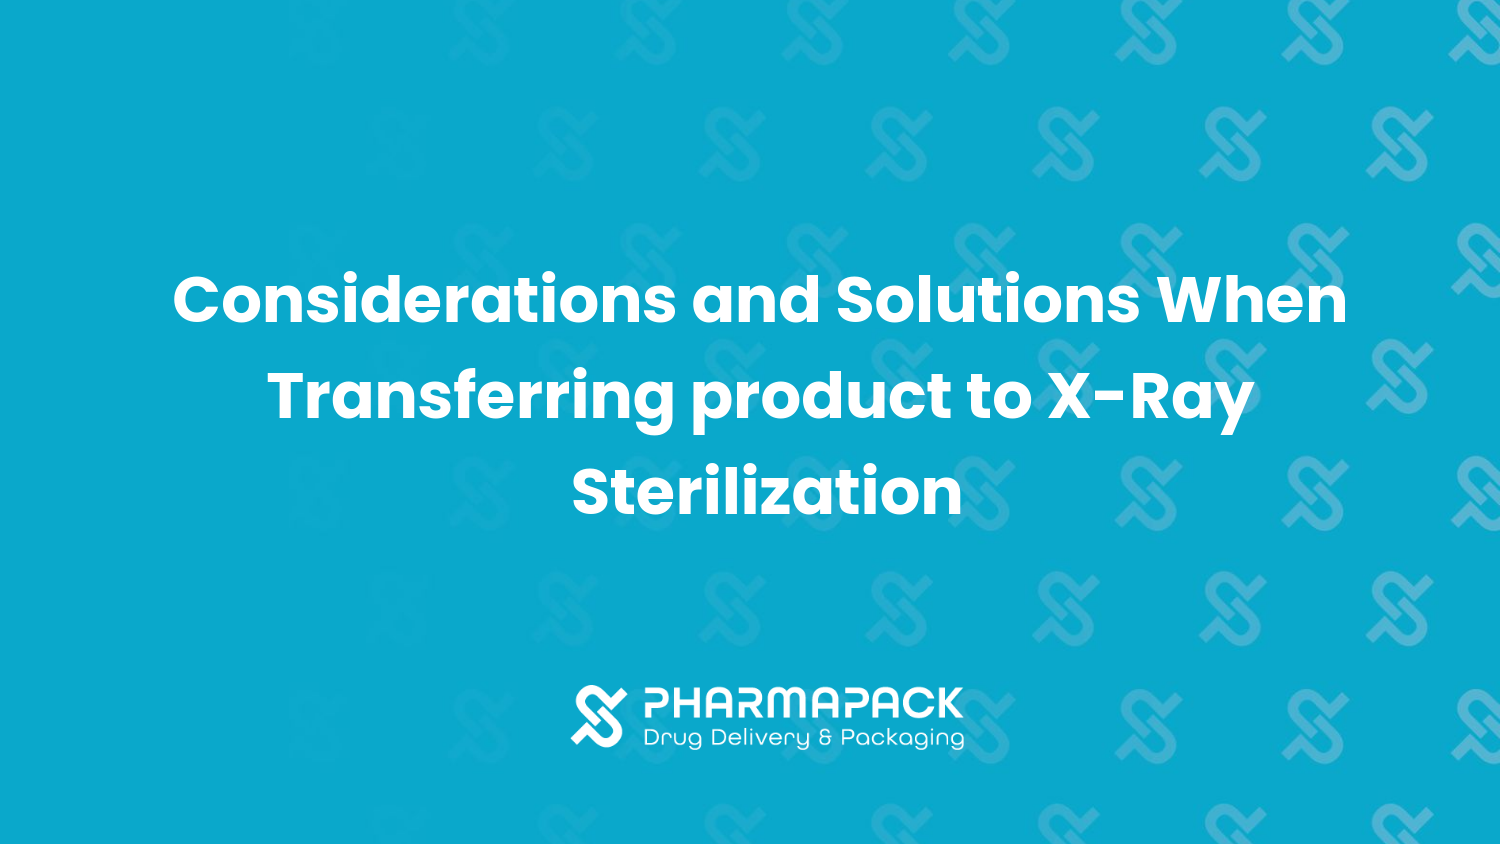 Considerations and Solutions When Transferring Product to X-Ray Sterilization